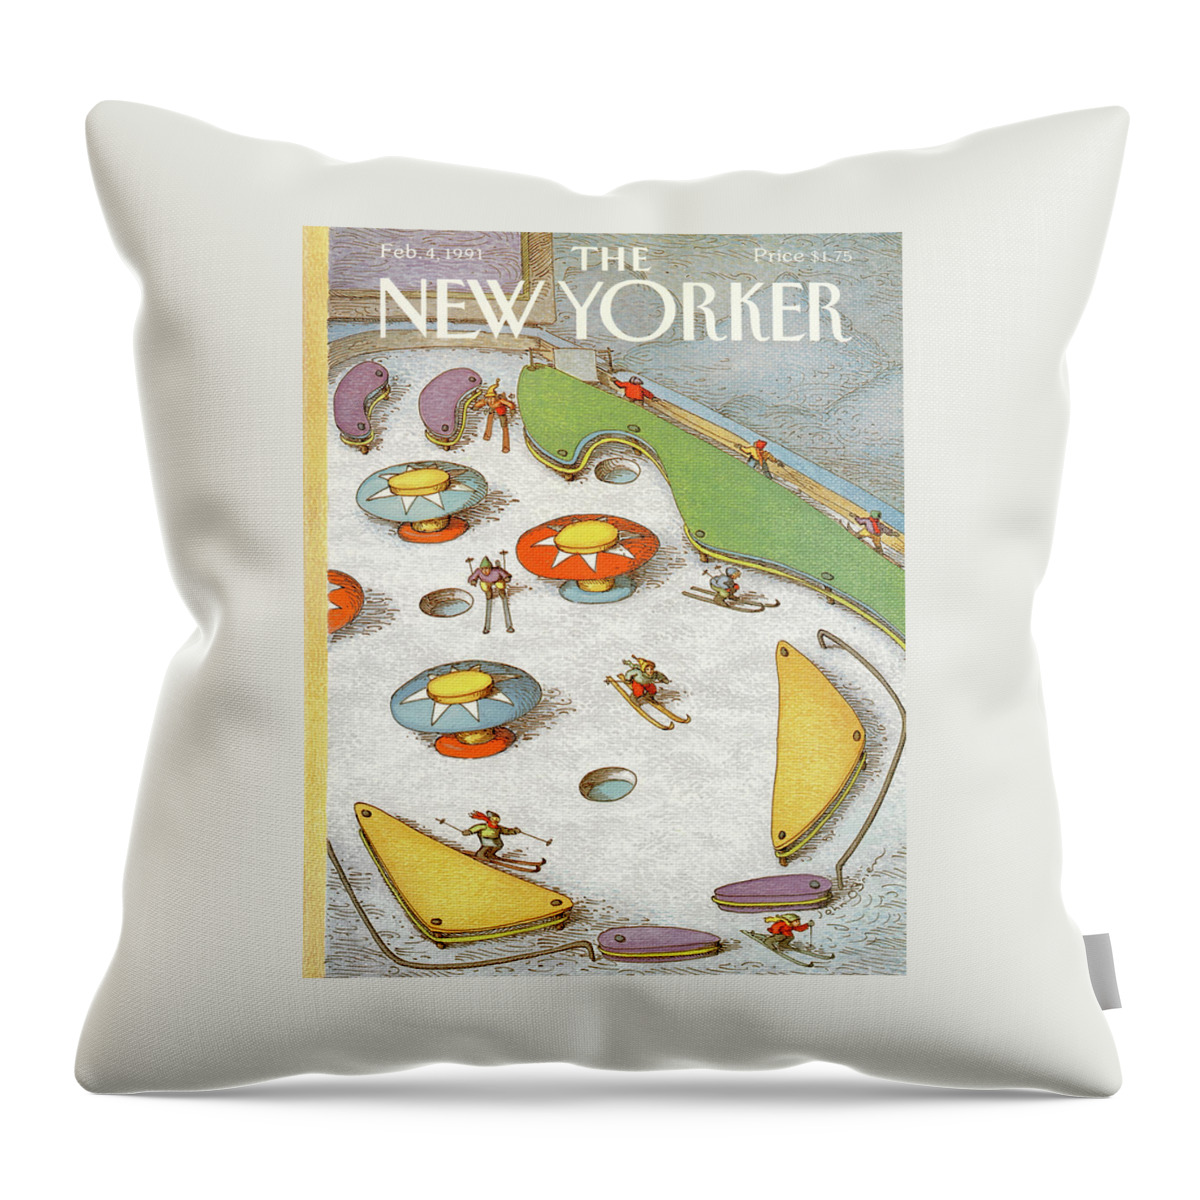 New Yorker February 4th, 1991 Throw Pillow